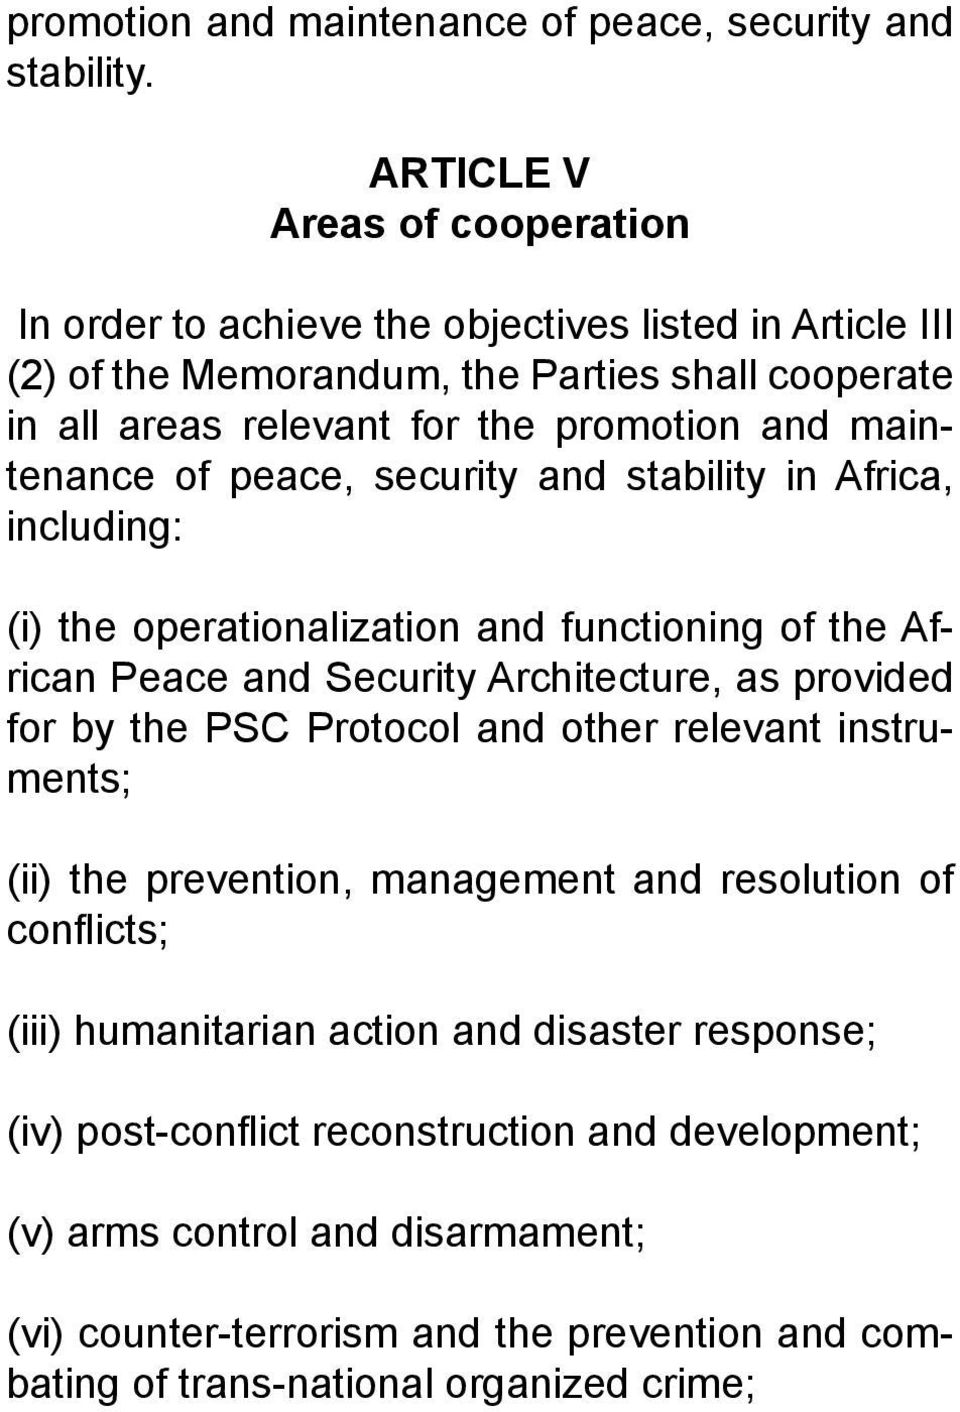 maintenance of peace, security and stability in Africa, including: (i) the operationalization and functioning of the African Peace and Security Architecture, as provided for by the PSC